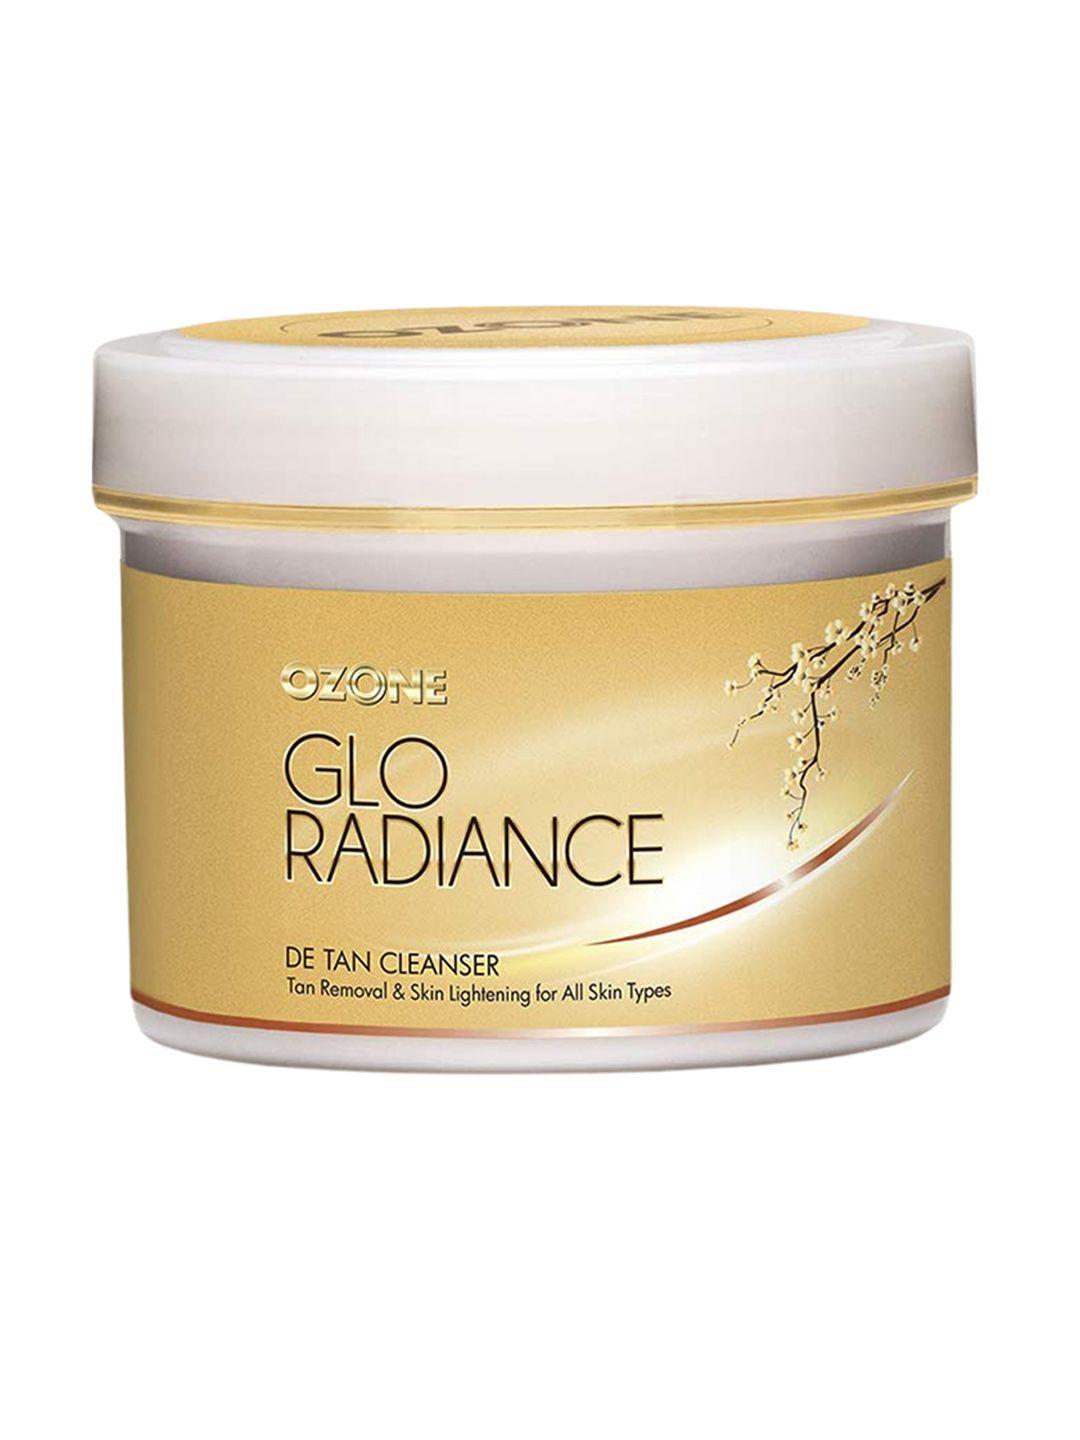 ozone glo radiance de tan facial cleanser with cucumber & shea butter - 250g